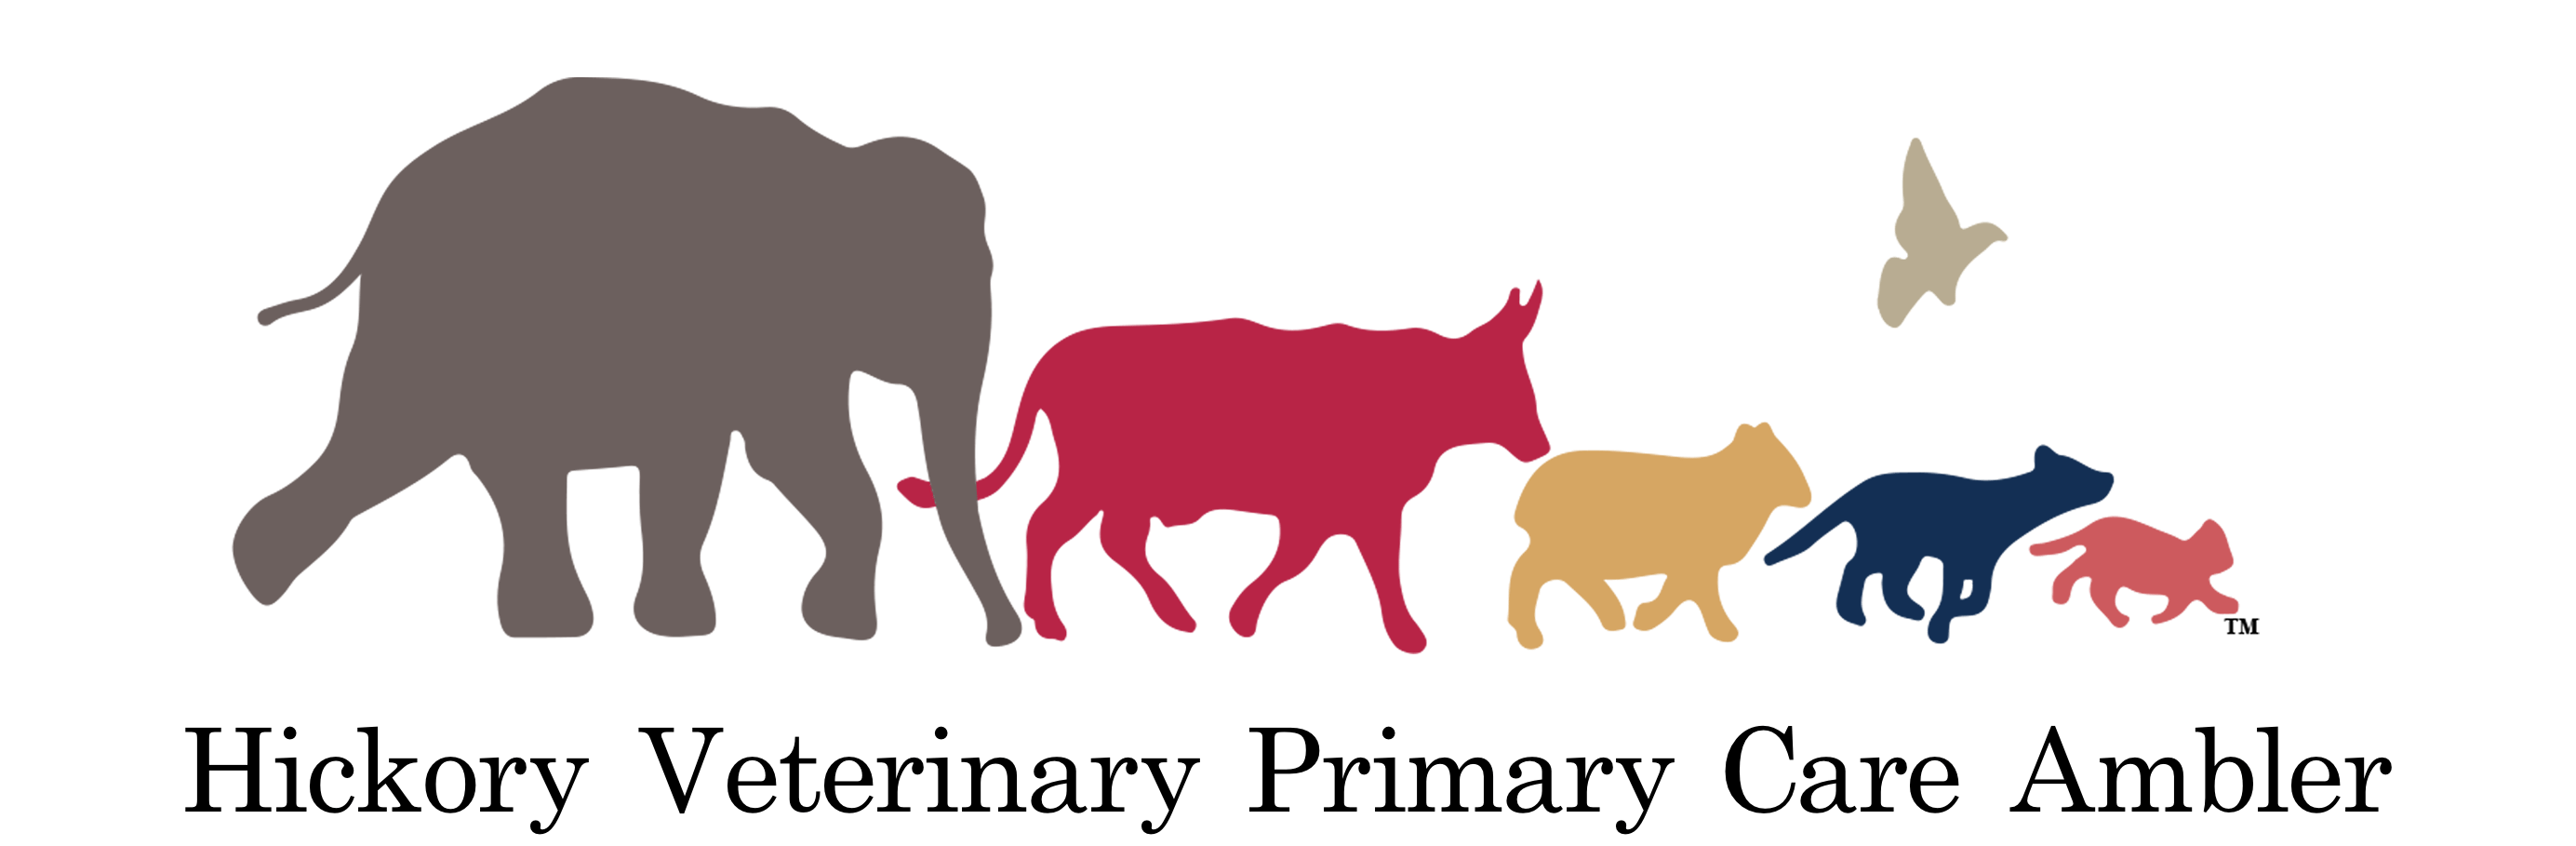 Hickory Veterinary Primary Care Ambler, PA